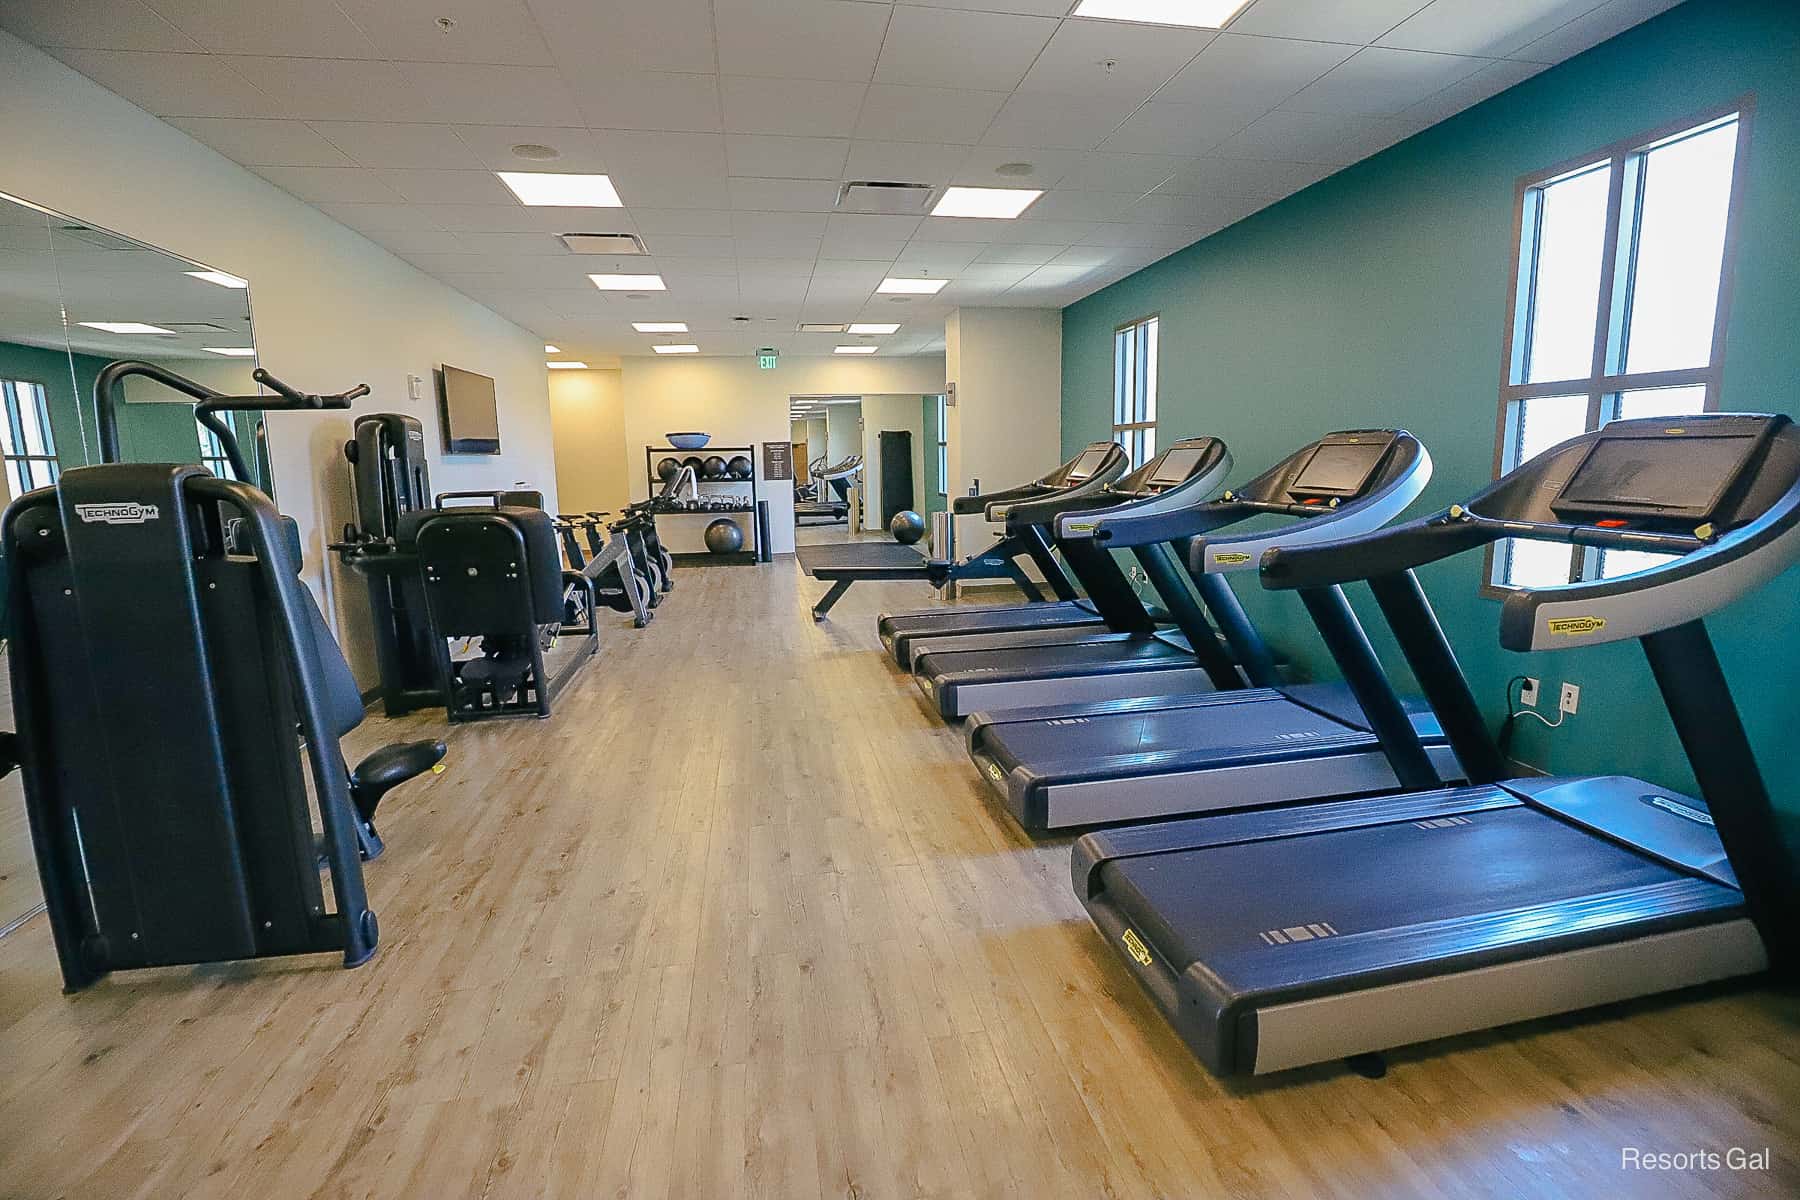 the interior of the gym with treadmills and other fitness equipment 